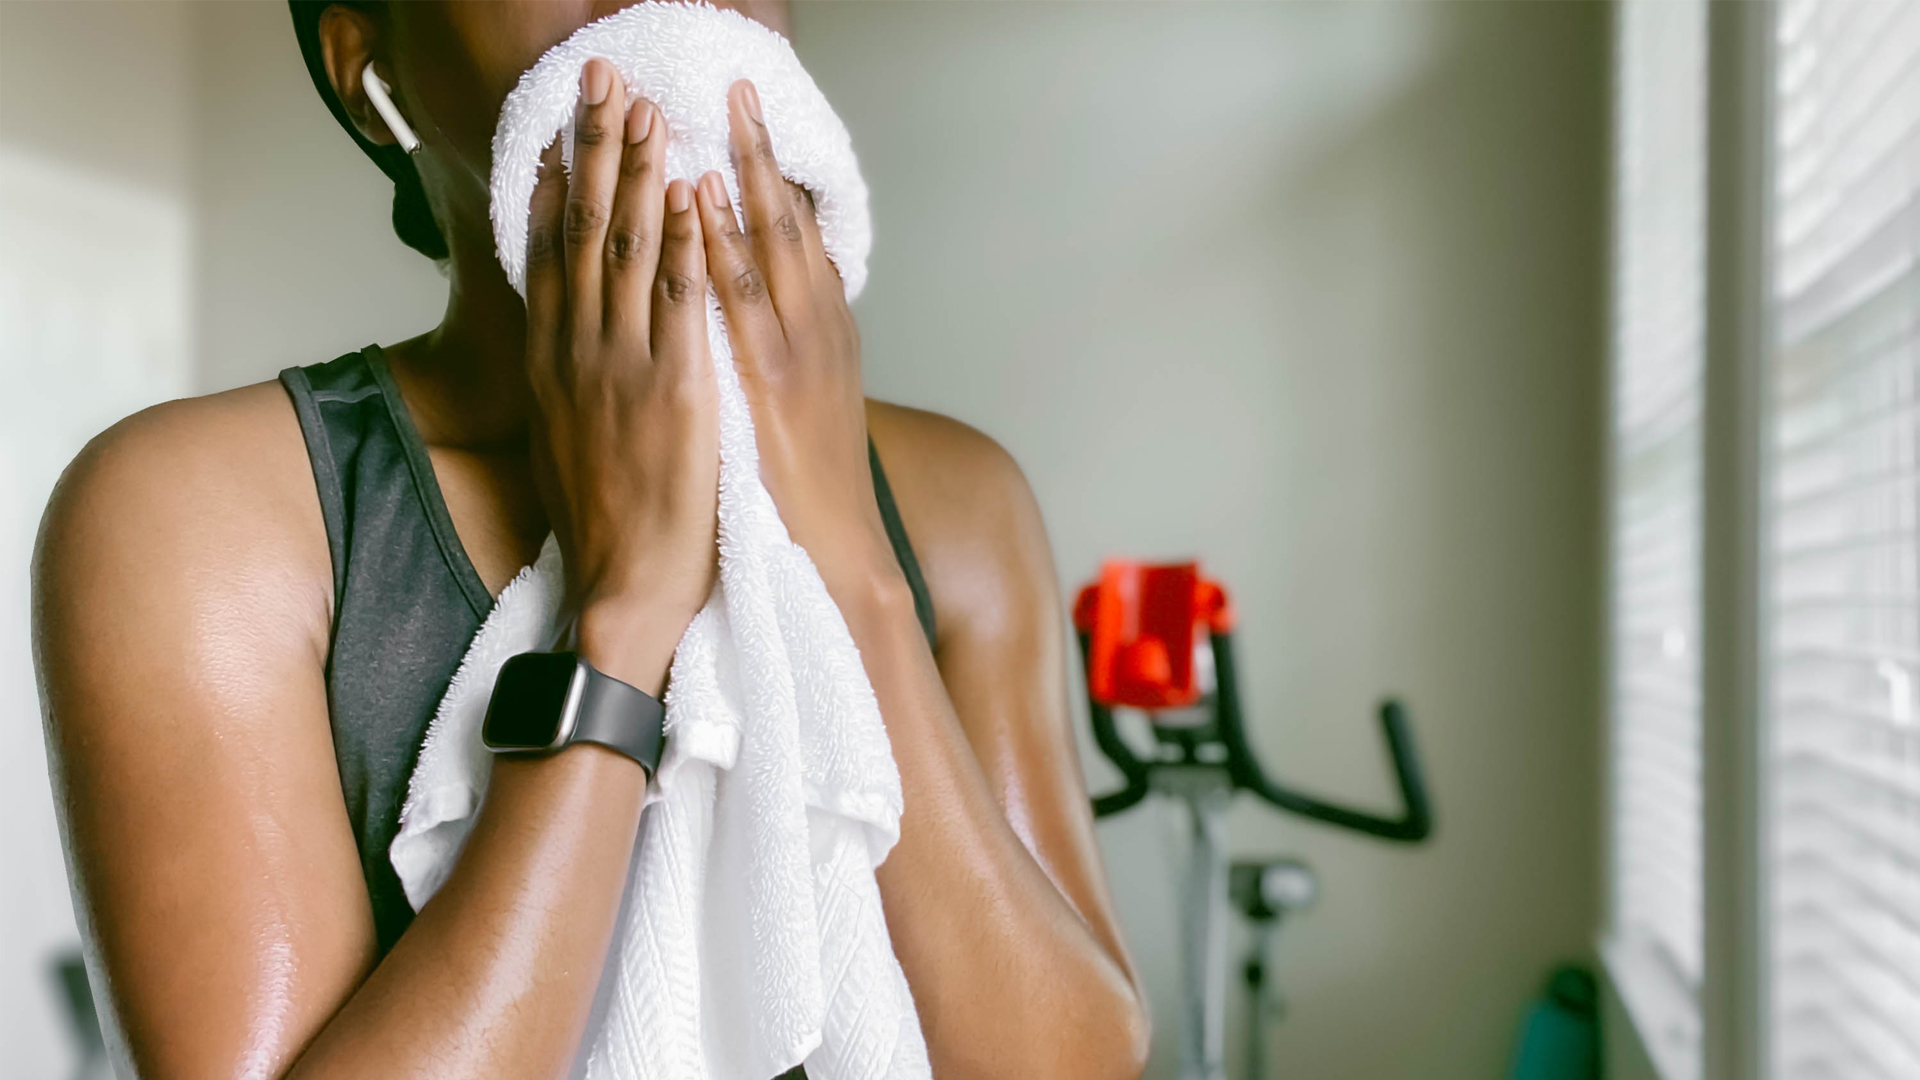 Image of a woman after training on an exercise bike